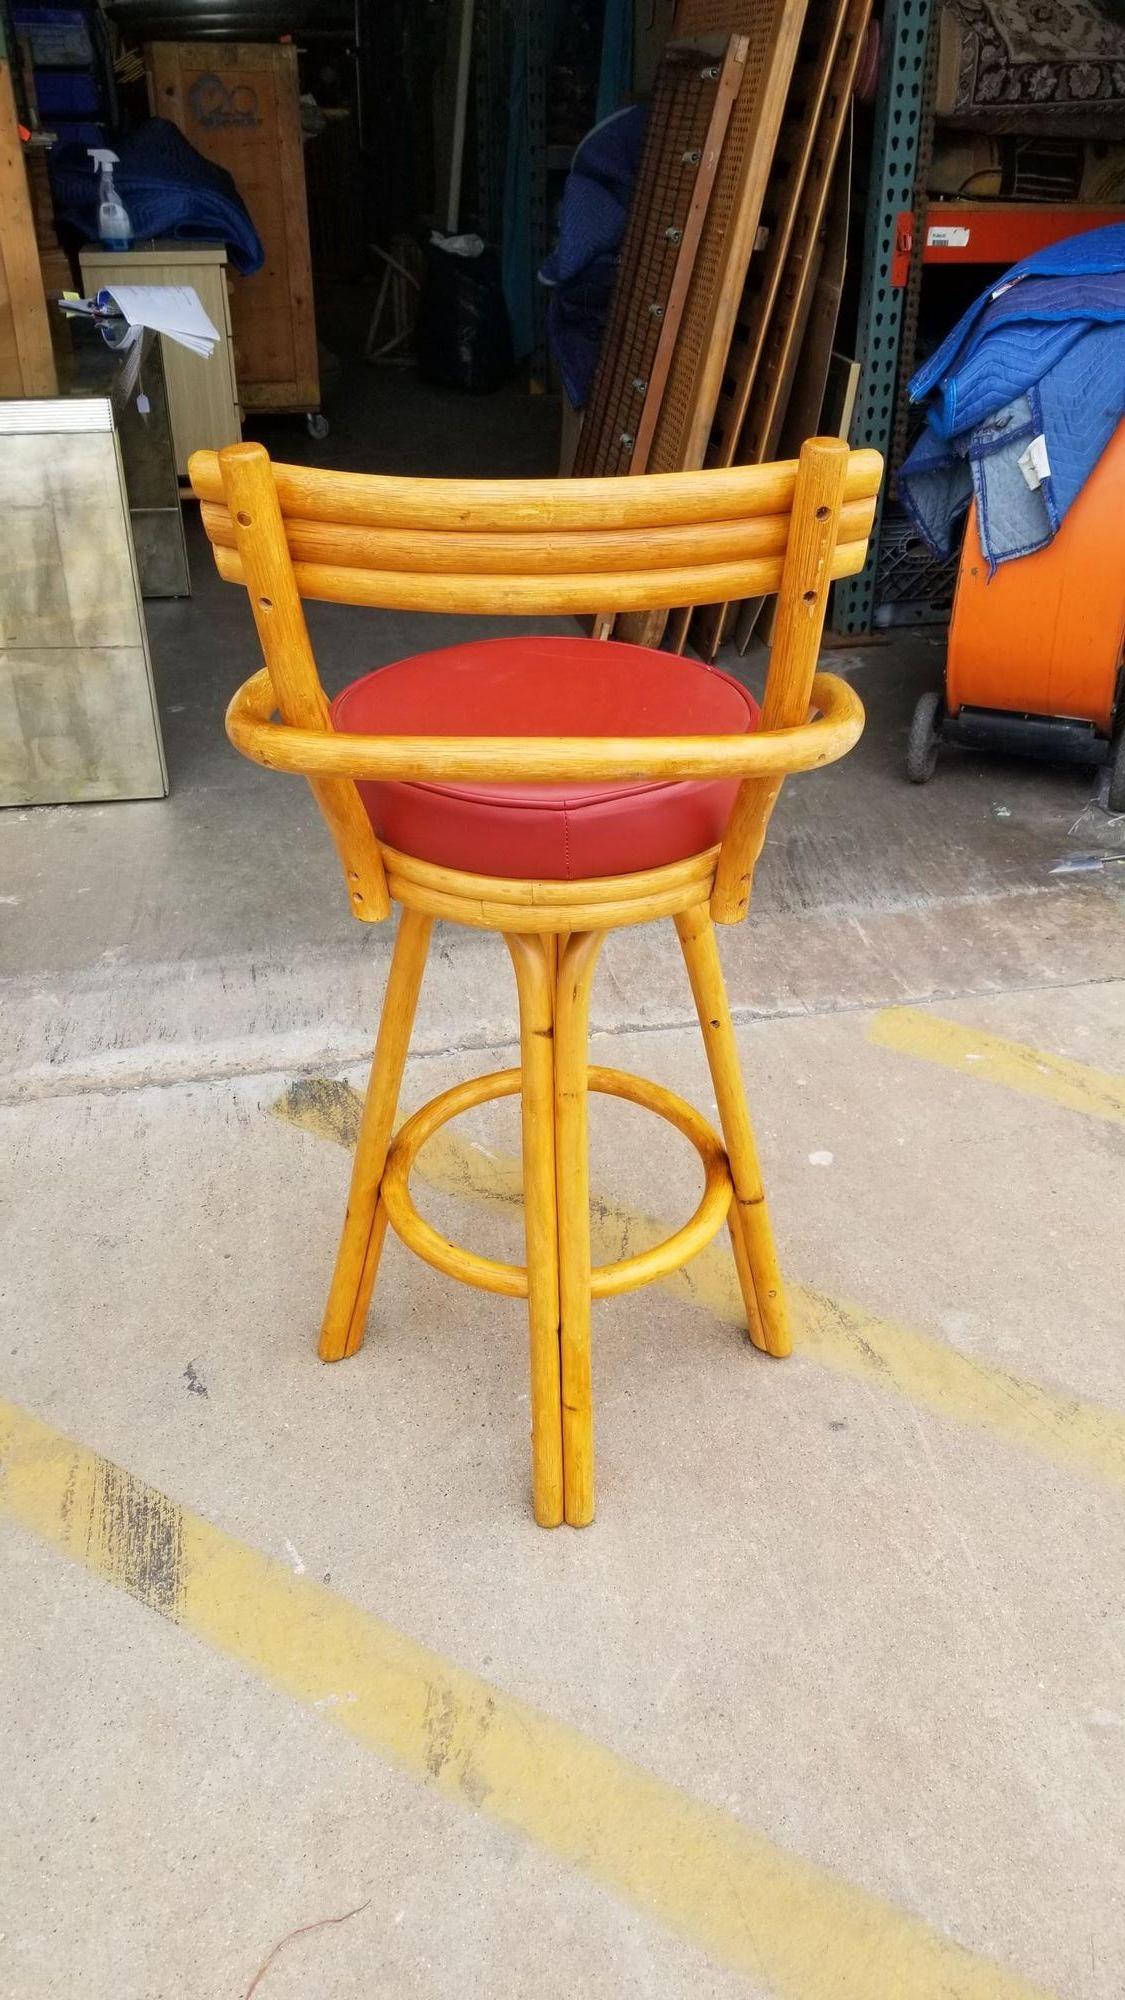 Restored rattan stacked-back set of 4 barstools in red Naugahyde swivel seats.

Elevate your seating experience with these meticulously restored rattan bar stools. Featuring swivel fabric seats and a stacked backrest for comfort and style, these